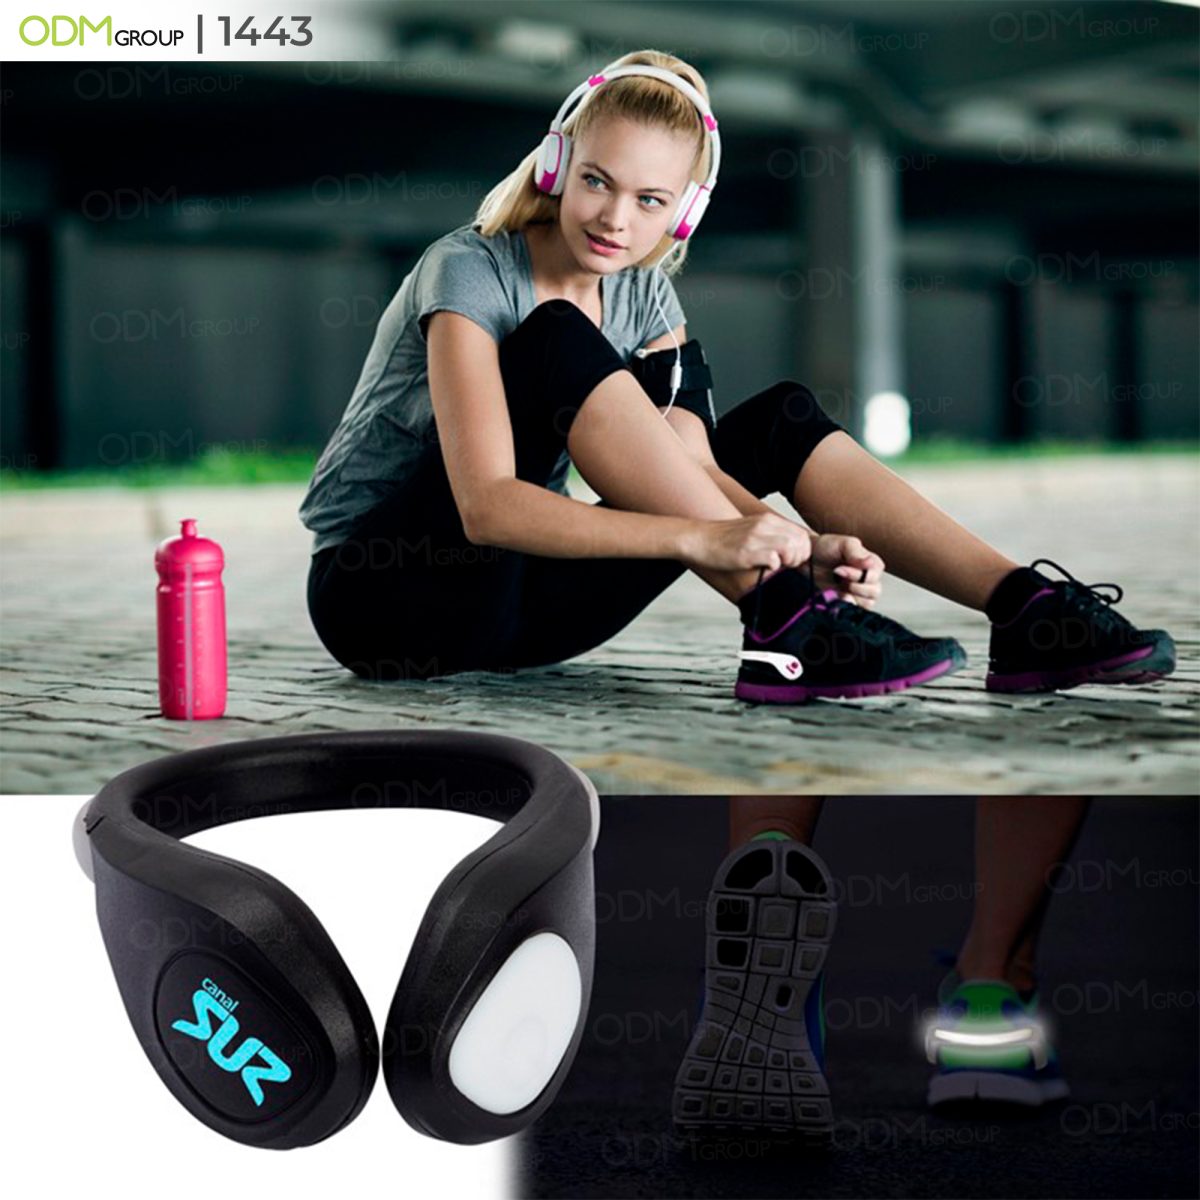 Ensure safety during night runs with this LED shoe clip, providing high visibility and a stylish touch to your workout gear.